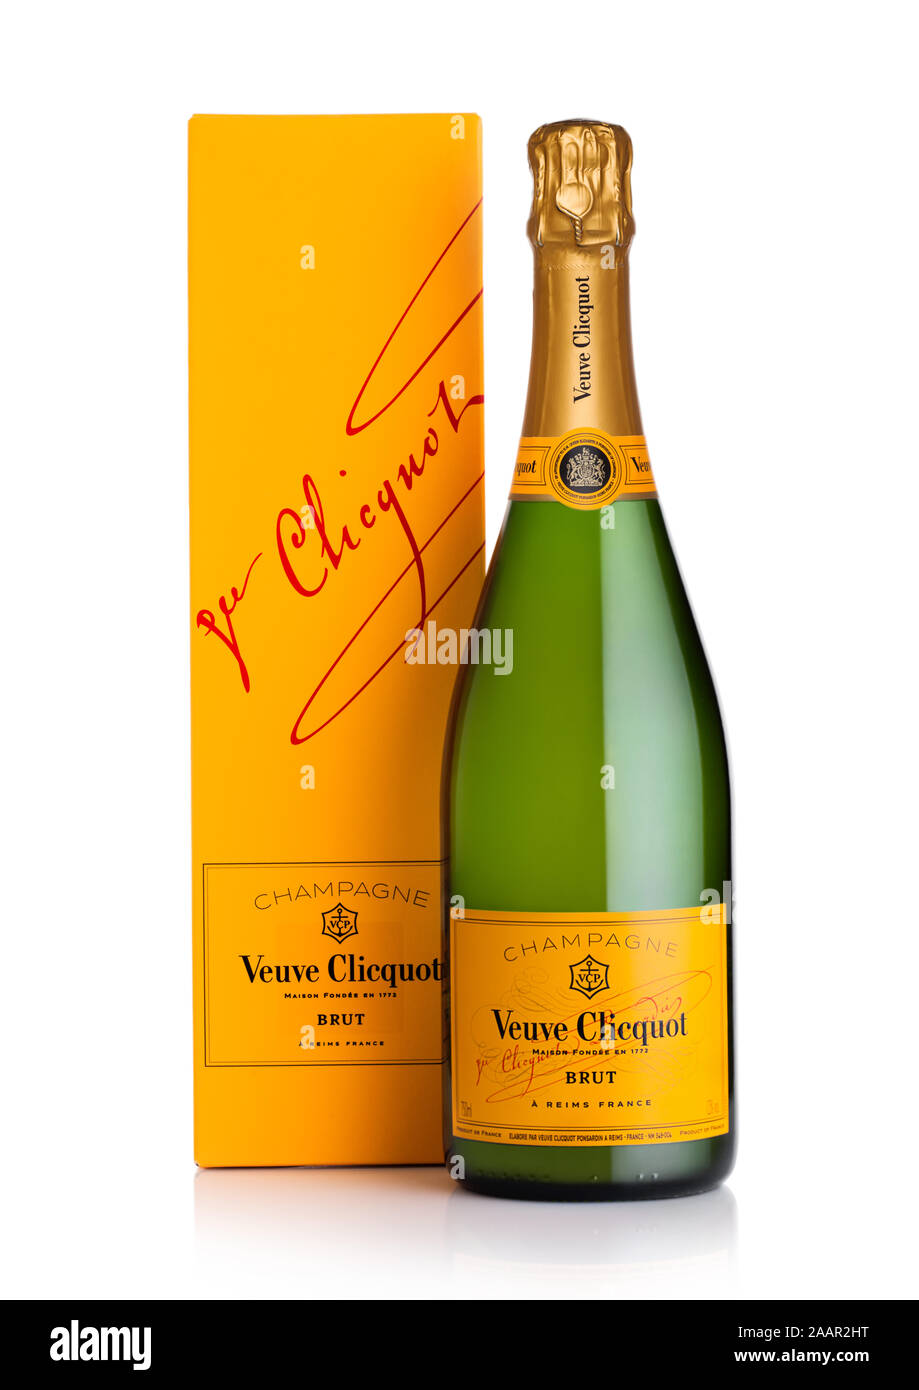 Veuve clicquot photography hi-res images Alamy - stock and label champagne